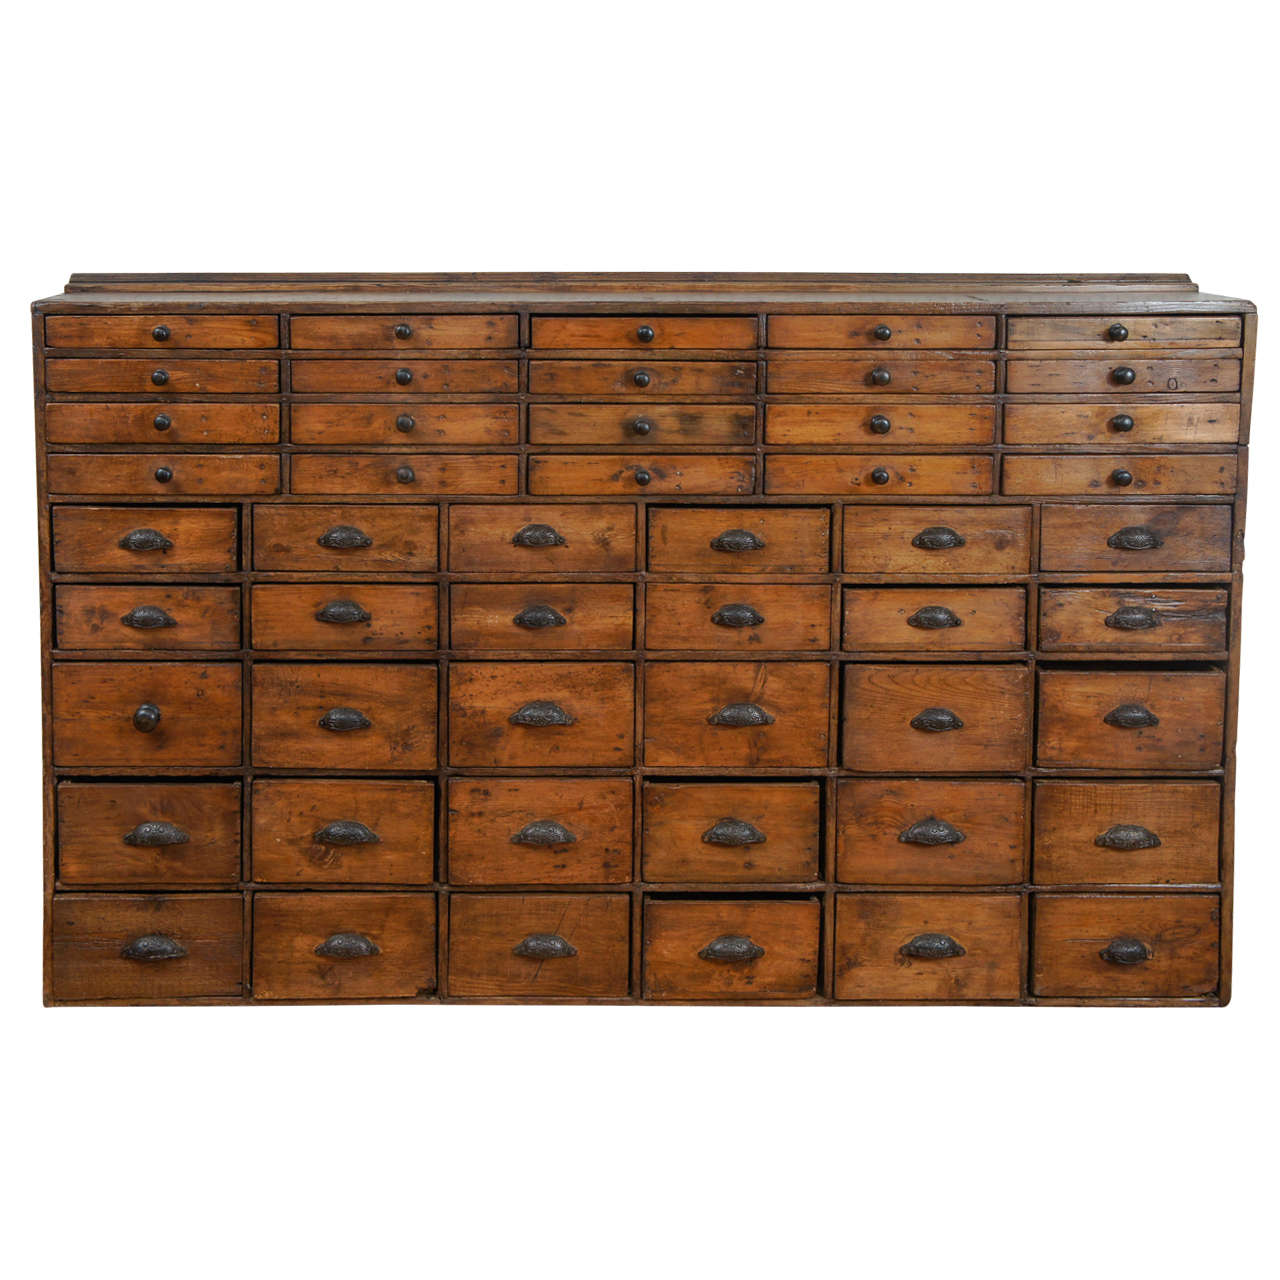 50 Drawer Pharmacy Apothecary